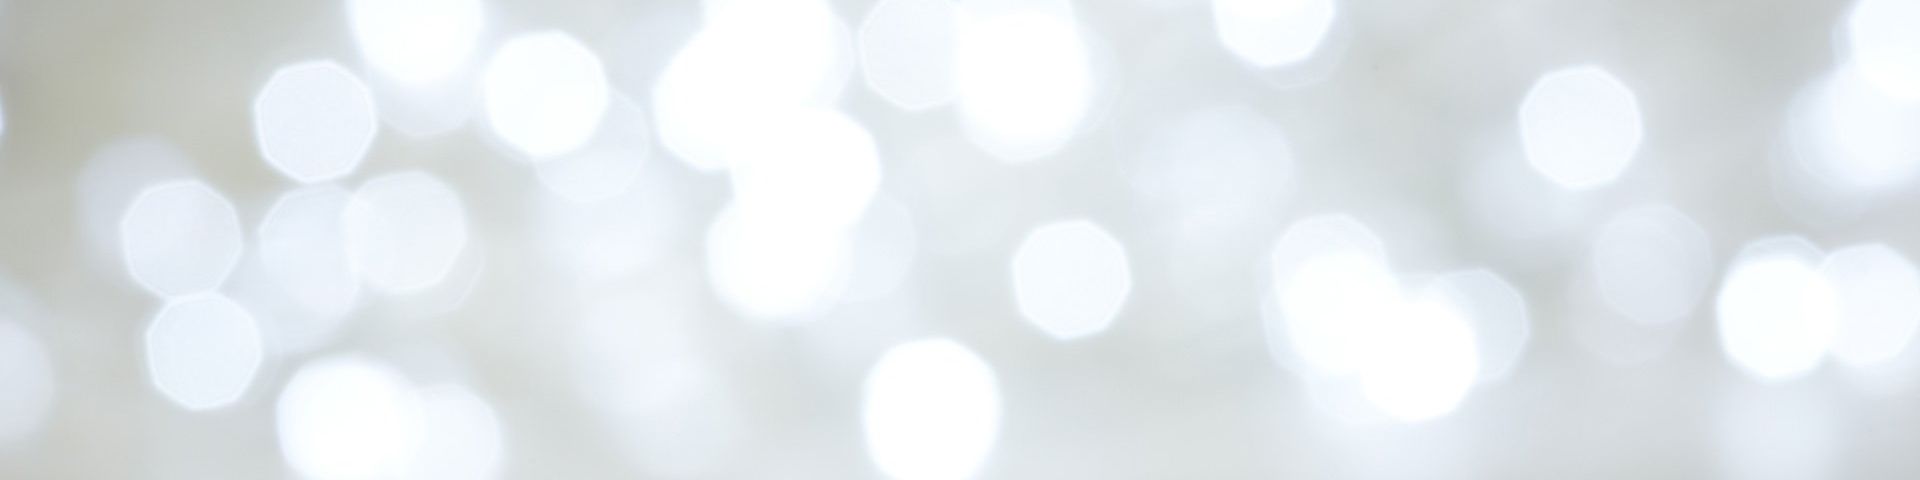 Dozens of lights, slightly blurred to create an abstract background in white and grey.